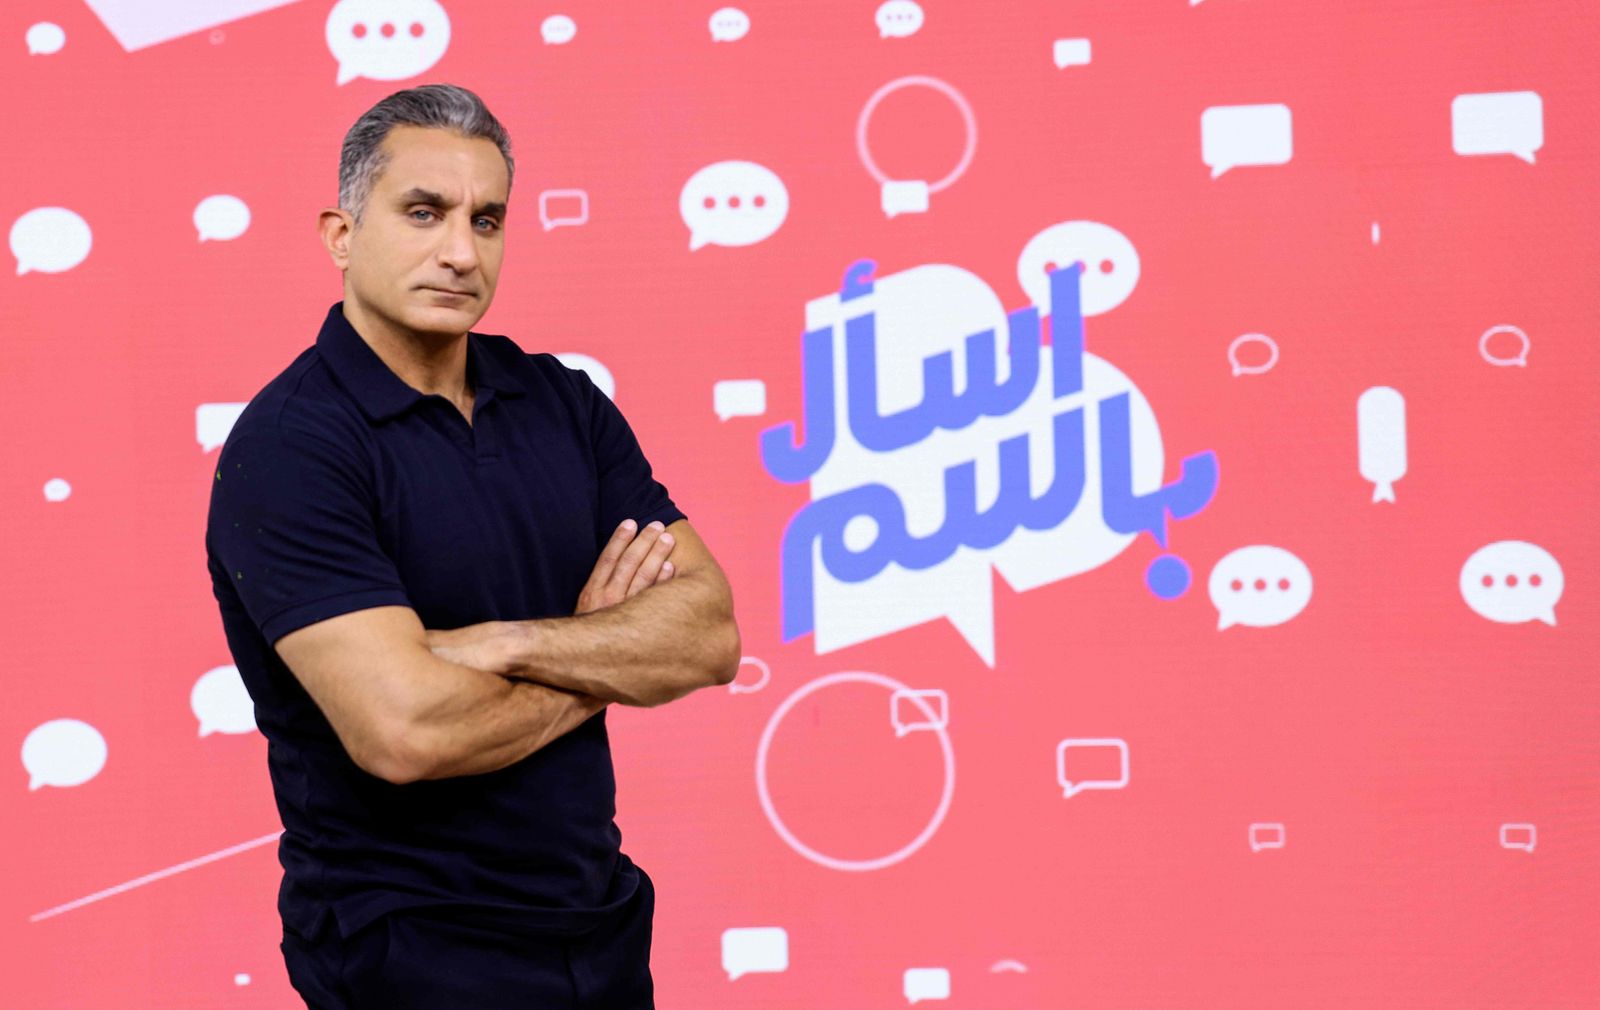 Egyptian star satirist Bassem Youssef poses for a picture at the studios of the Saudi-owned television station Asharq, in the Gulf emirate of Dubai, on November 13, 2020, where he has been filming his new show 